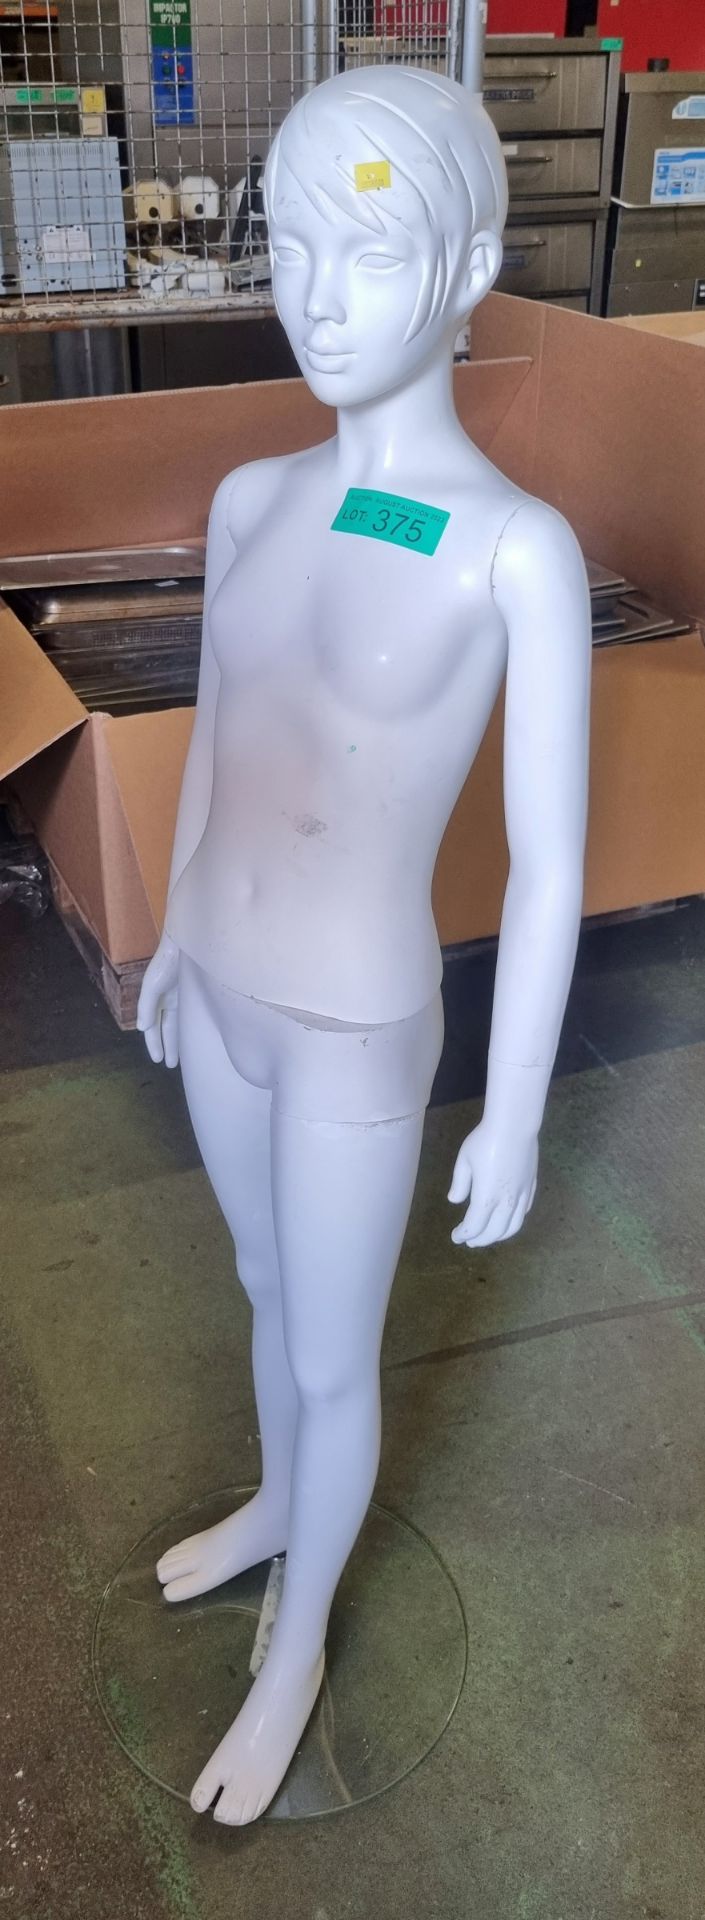 Mannequin - Girl standing - Image 2 of 2